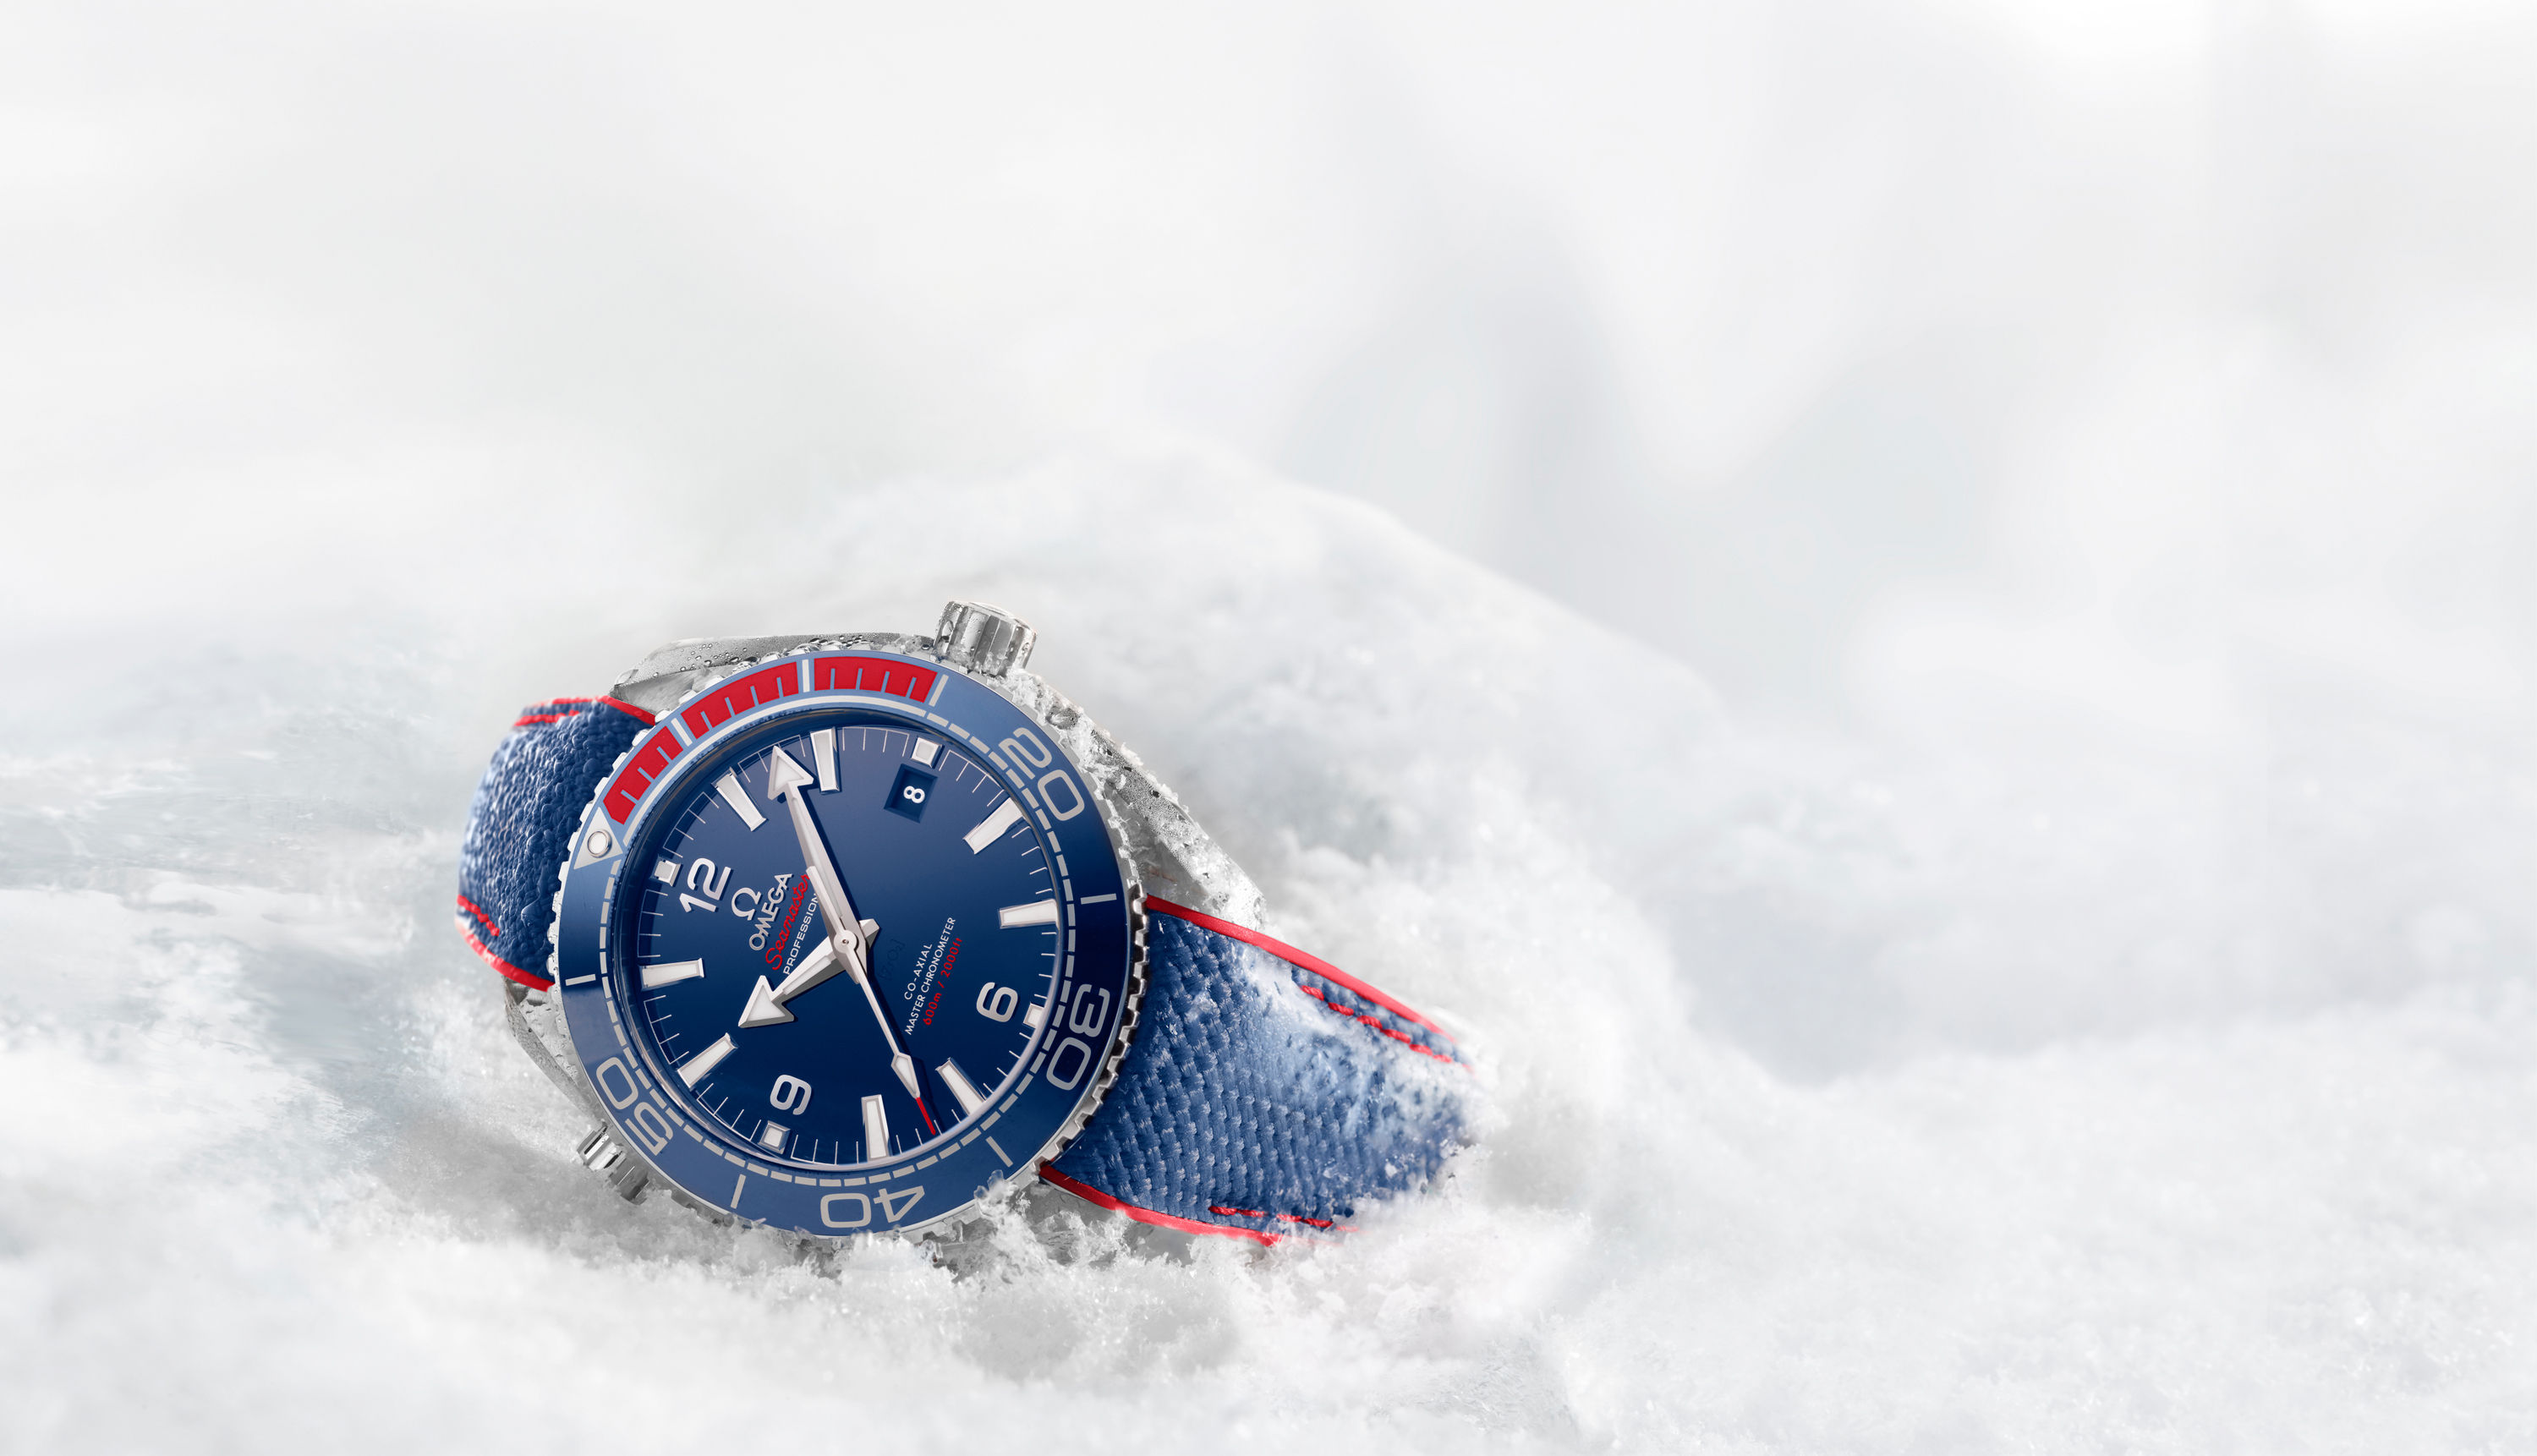 Omega celebrates another year of timekeeping excellence at the Olympic Winter Games 2018